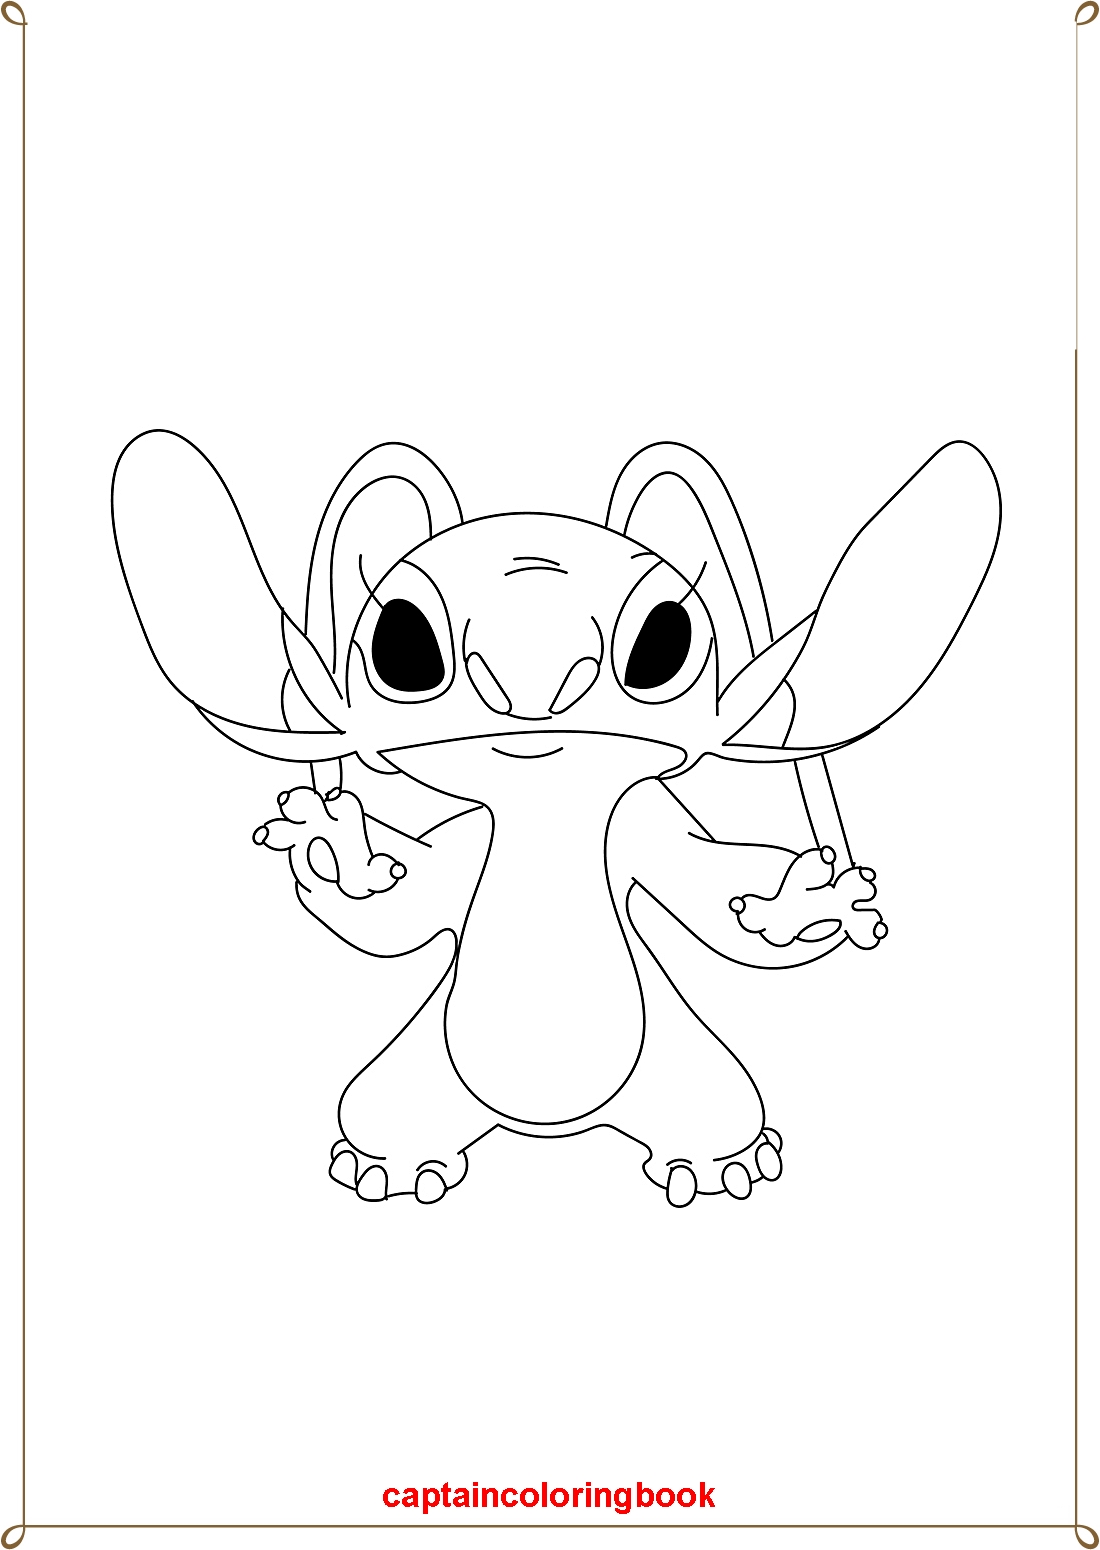 Angel Adorable Stitch Coloring Pages - Stitch & Angel hugging - Lilo